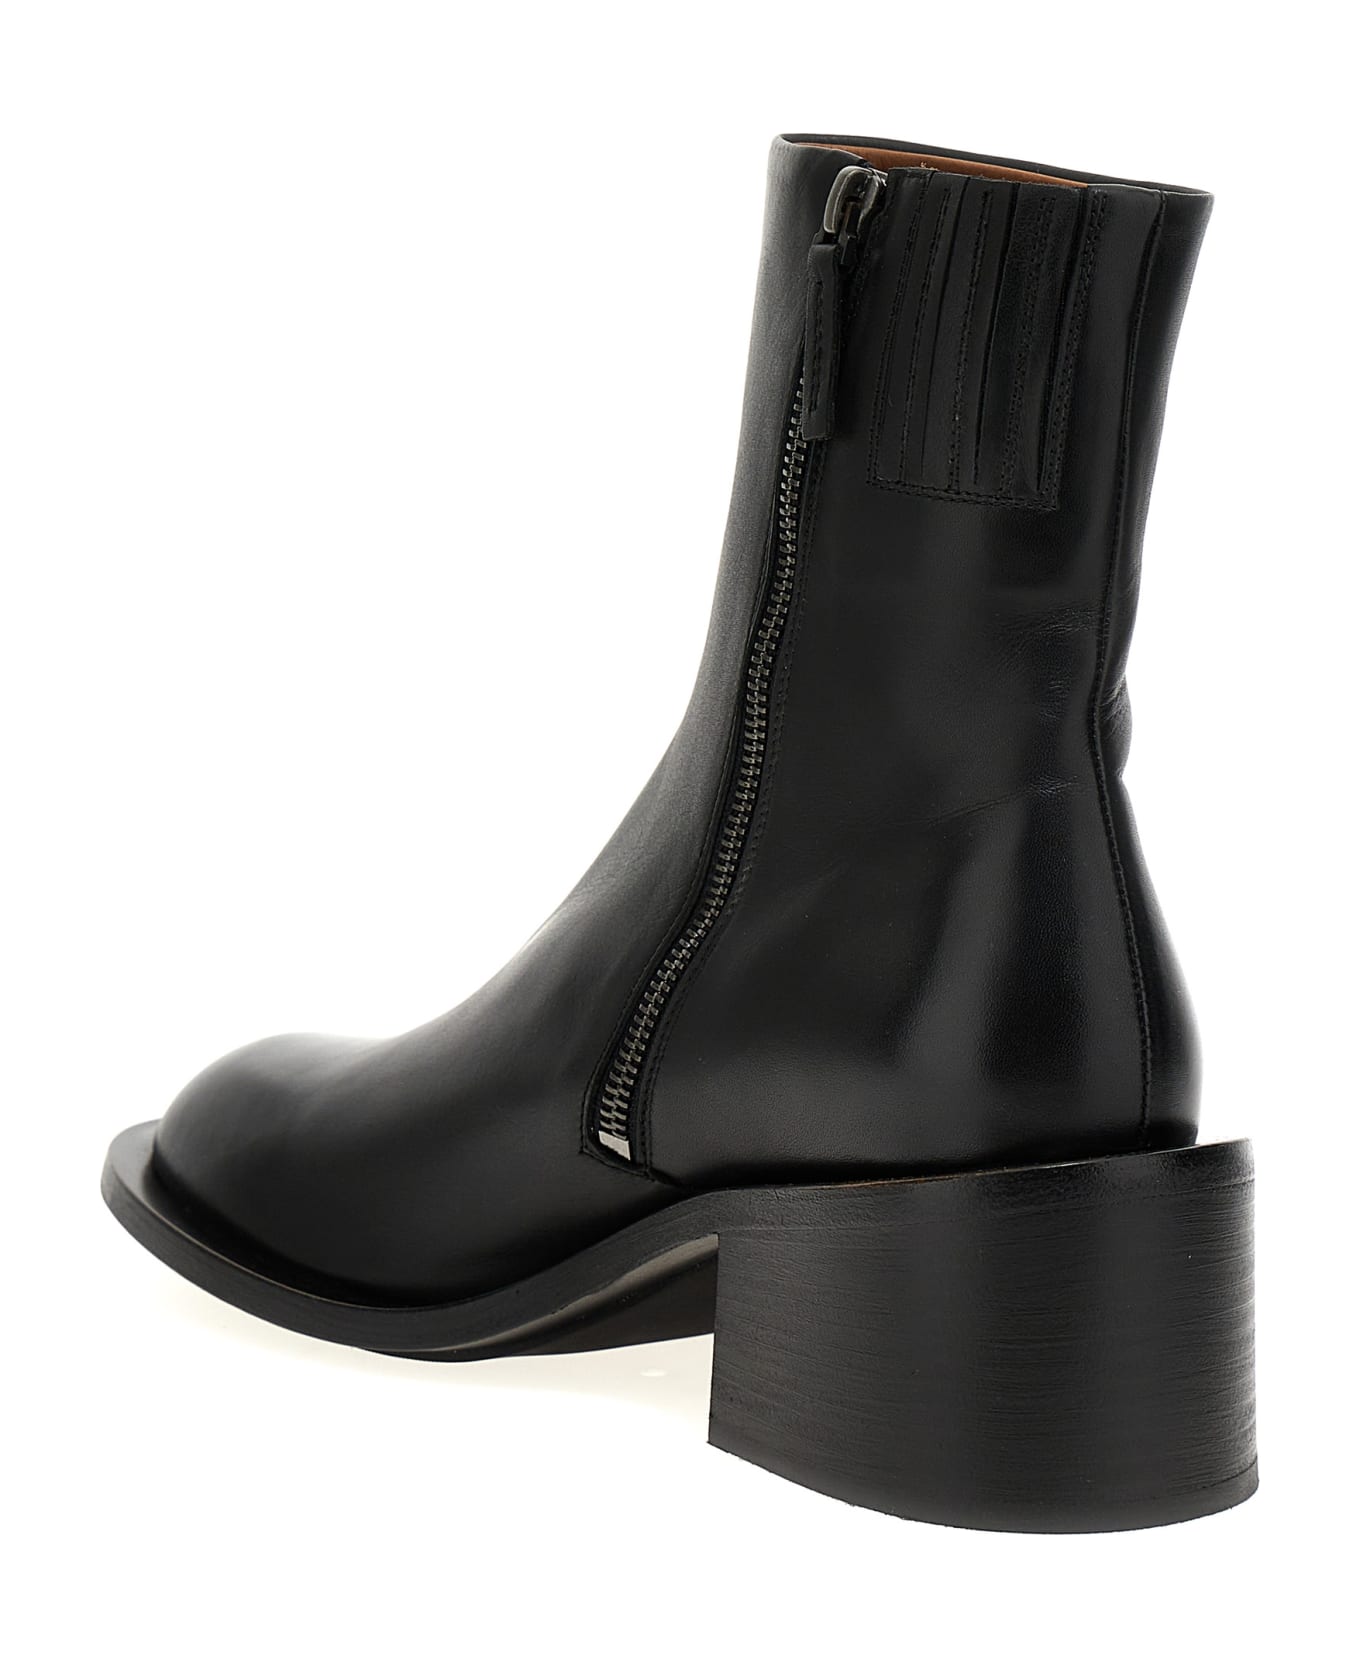 Marsell 'allucino' Ankle Boots - Black   ブーツ